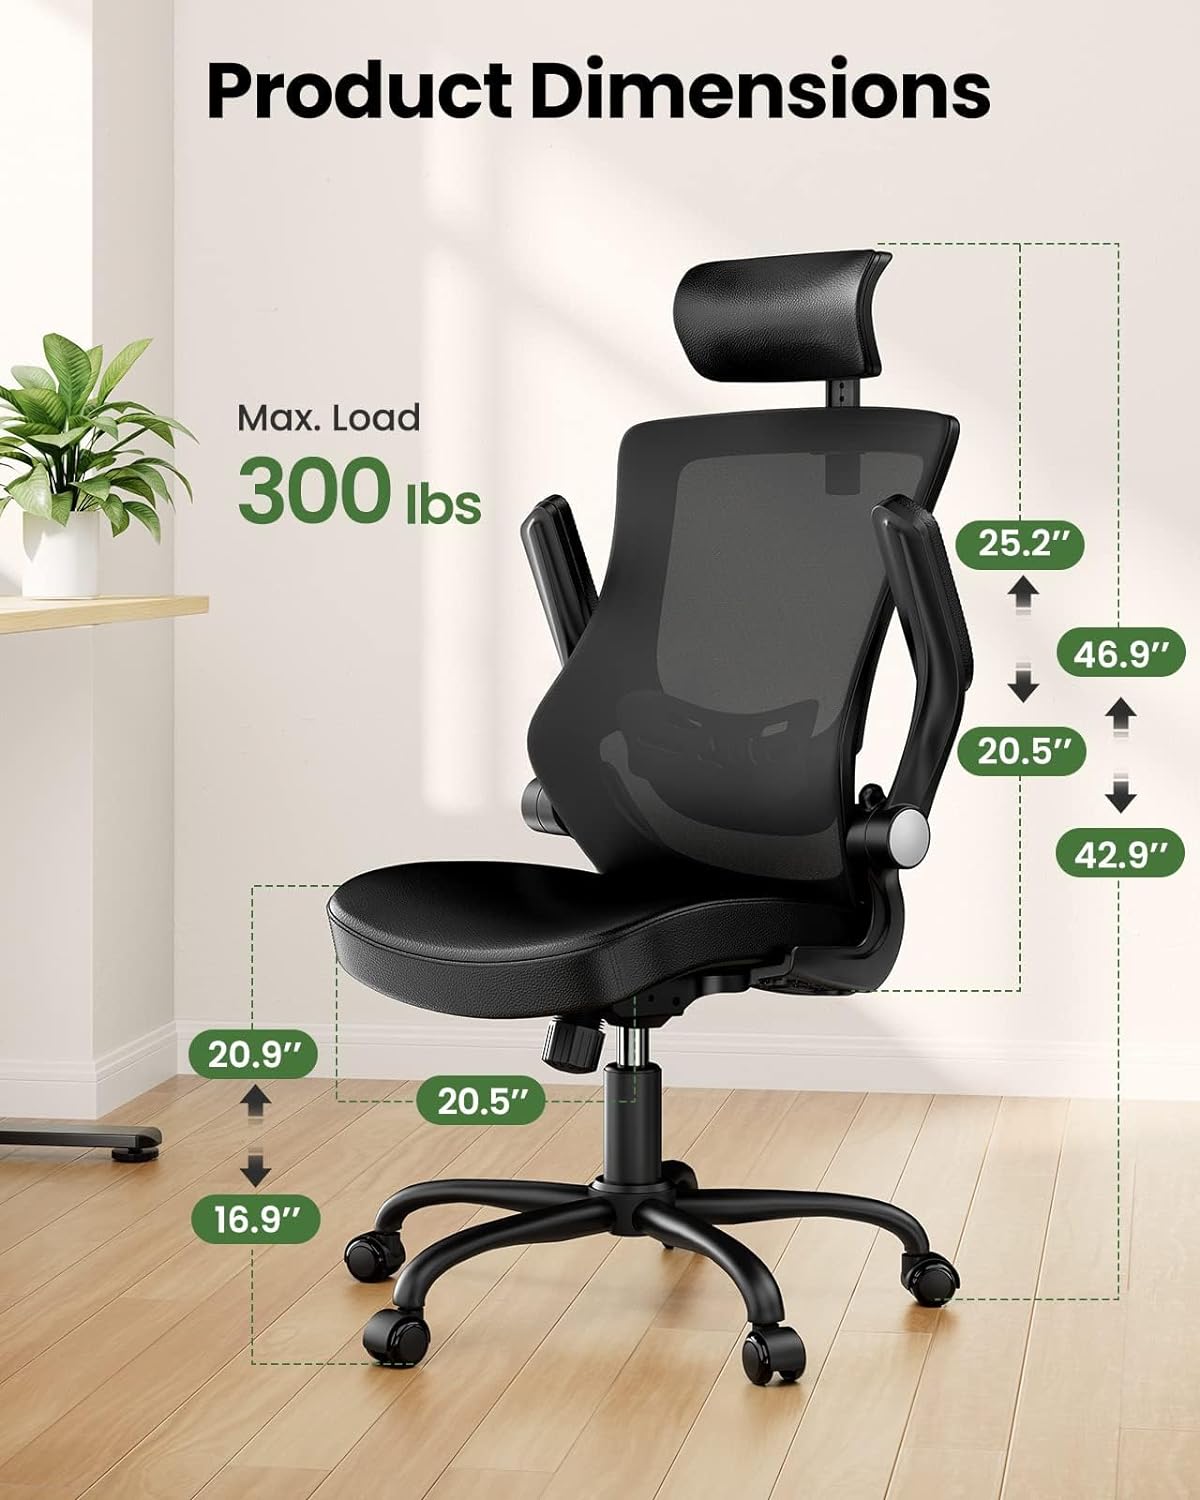 Marsail Office Chair Ergonomic Desk Chair with Mesh Back and Leather Cushion,Flip-up Armrests&Lumbar Support,Ergonomic Adjustable Height Home Office Desk Chairs,Black